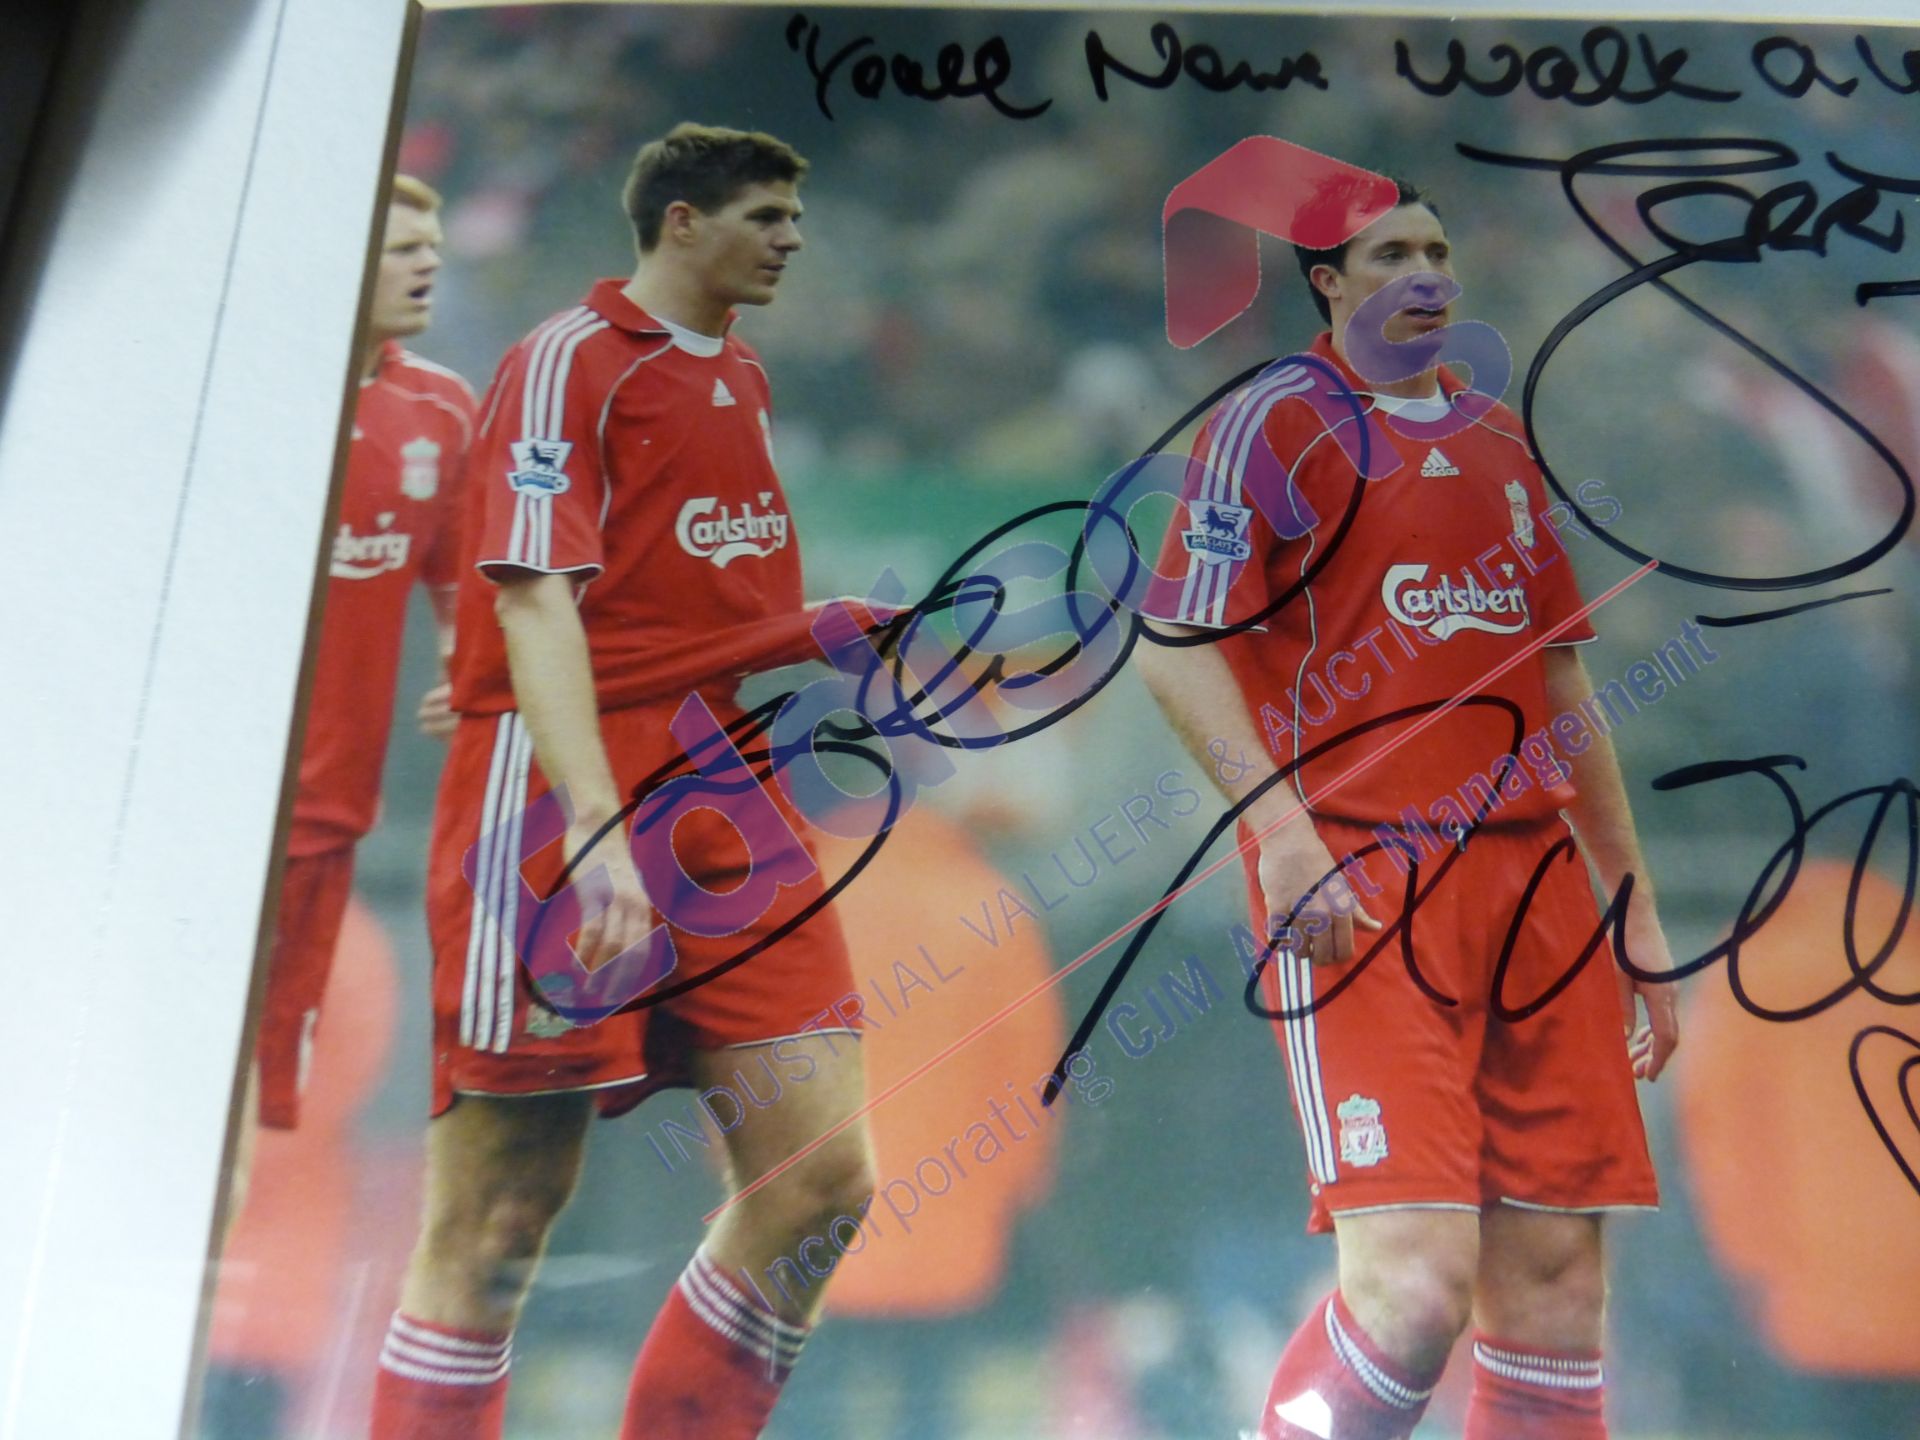 Sports Autographs: " You'll Never Walk Alone" - Image 4 of 5